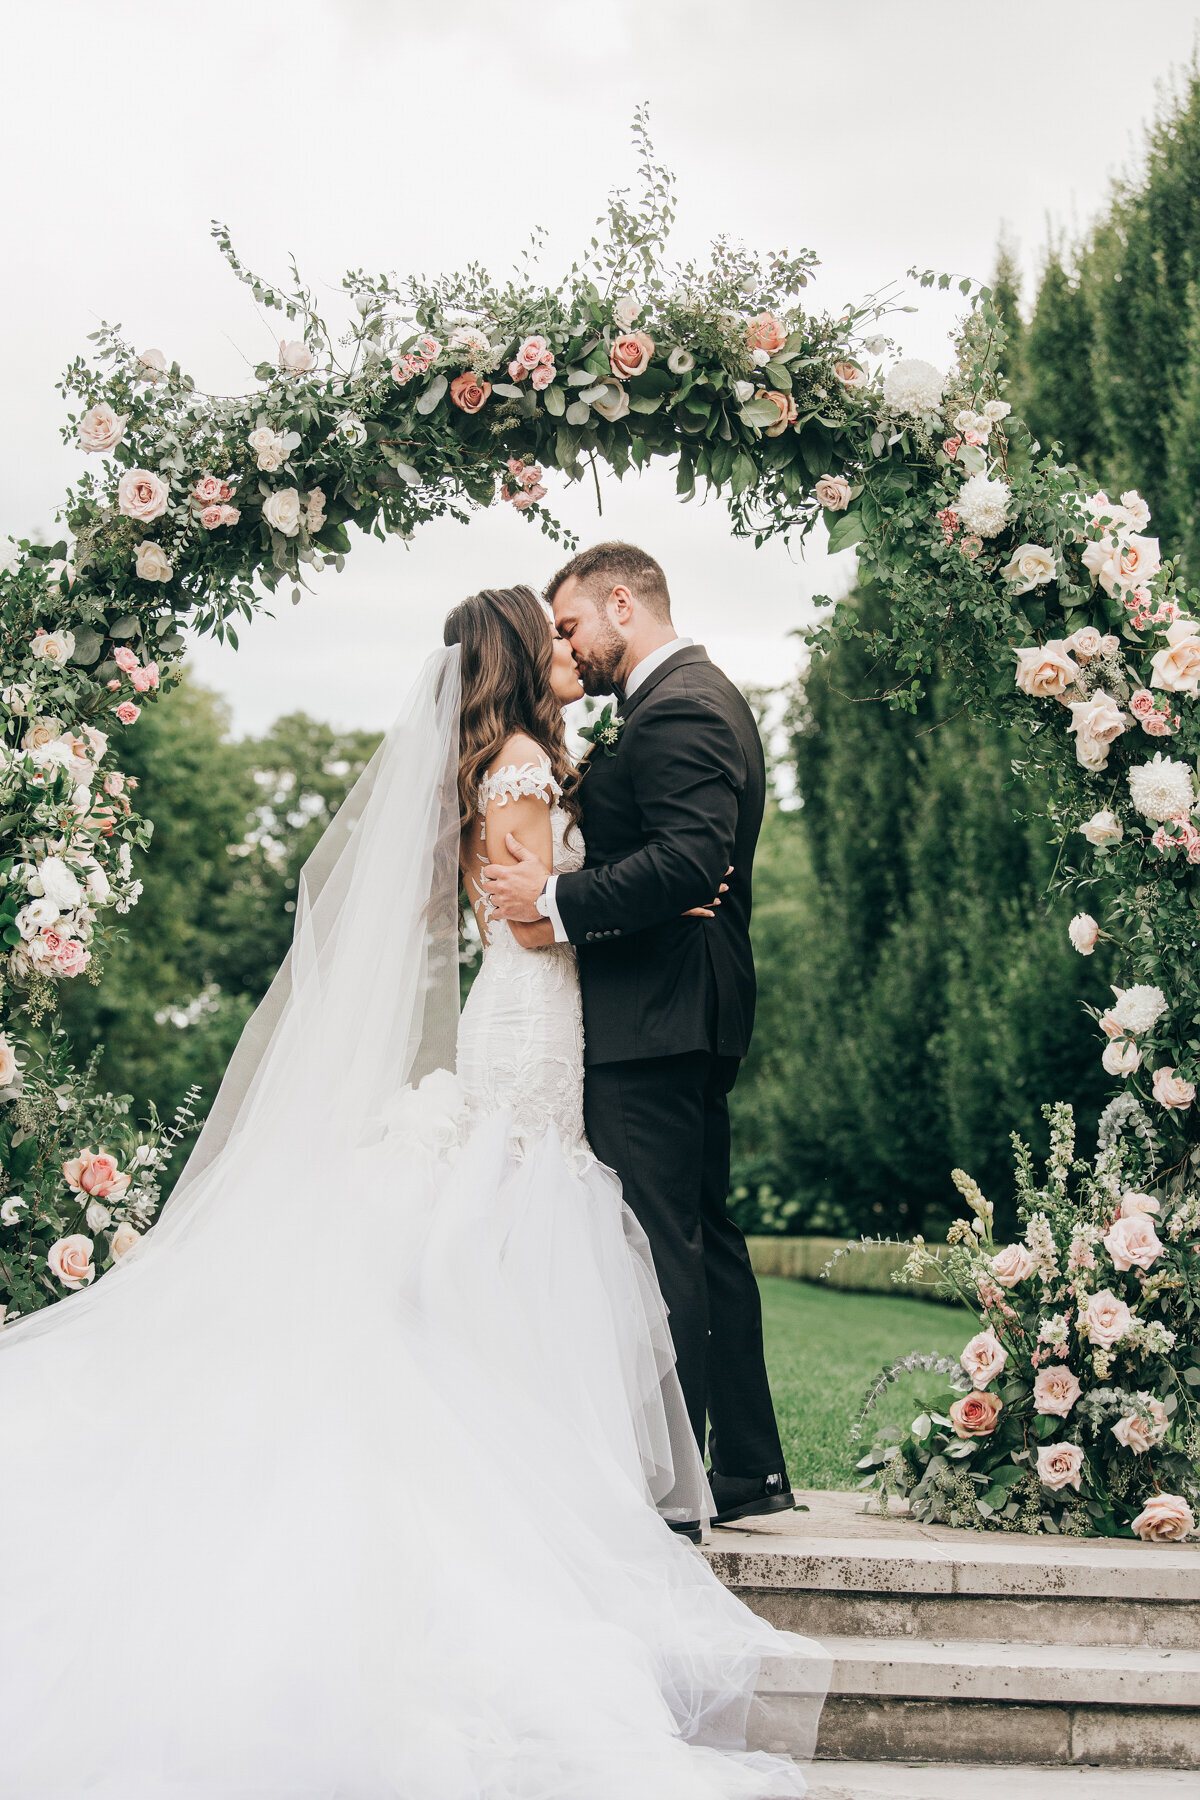 Bride and groom first kiss under luxurious rose arch